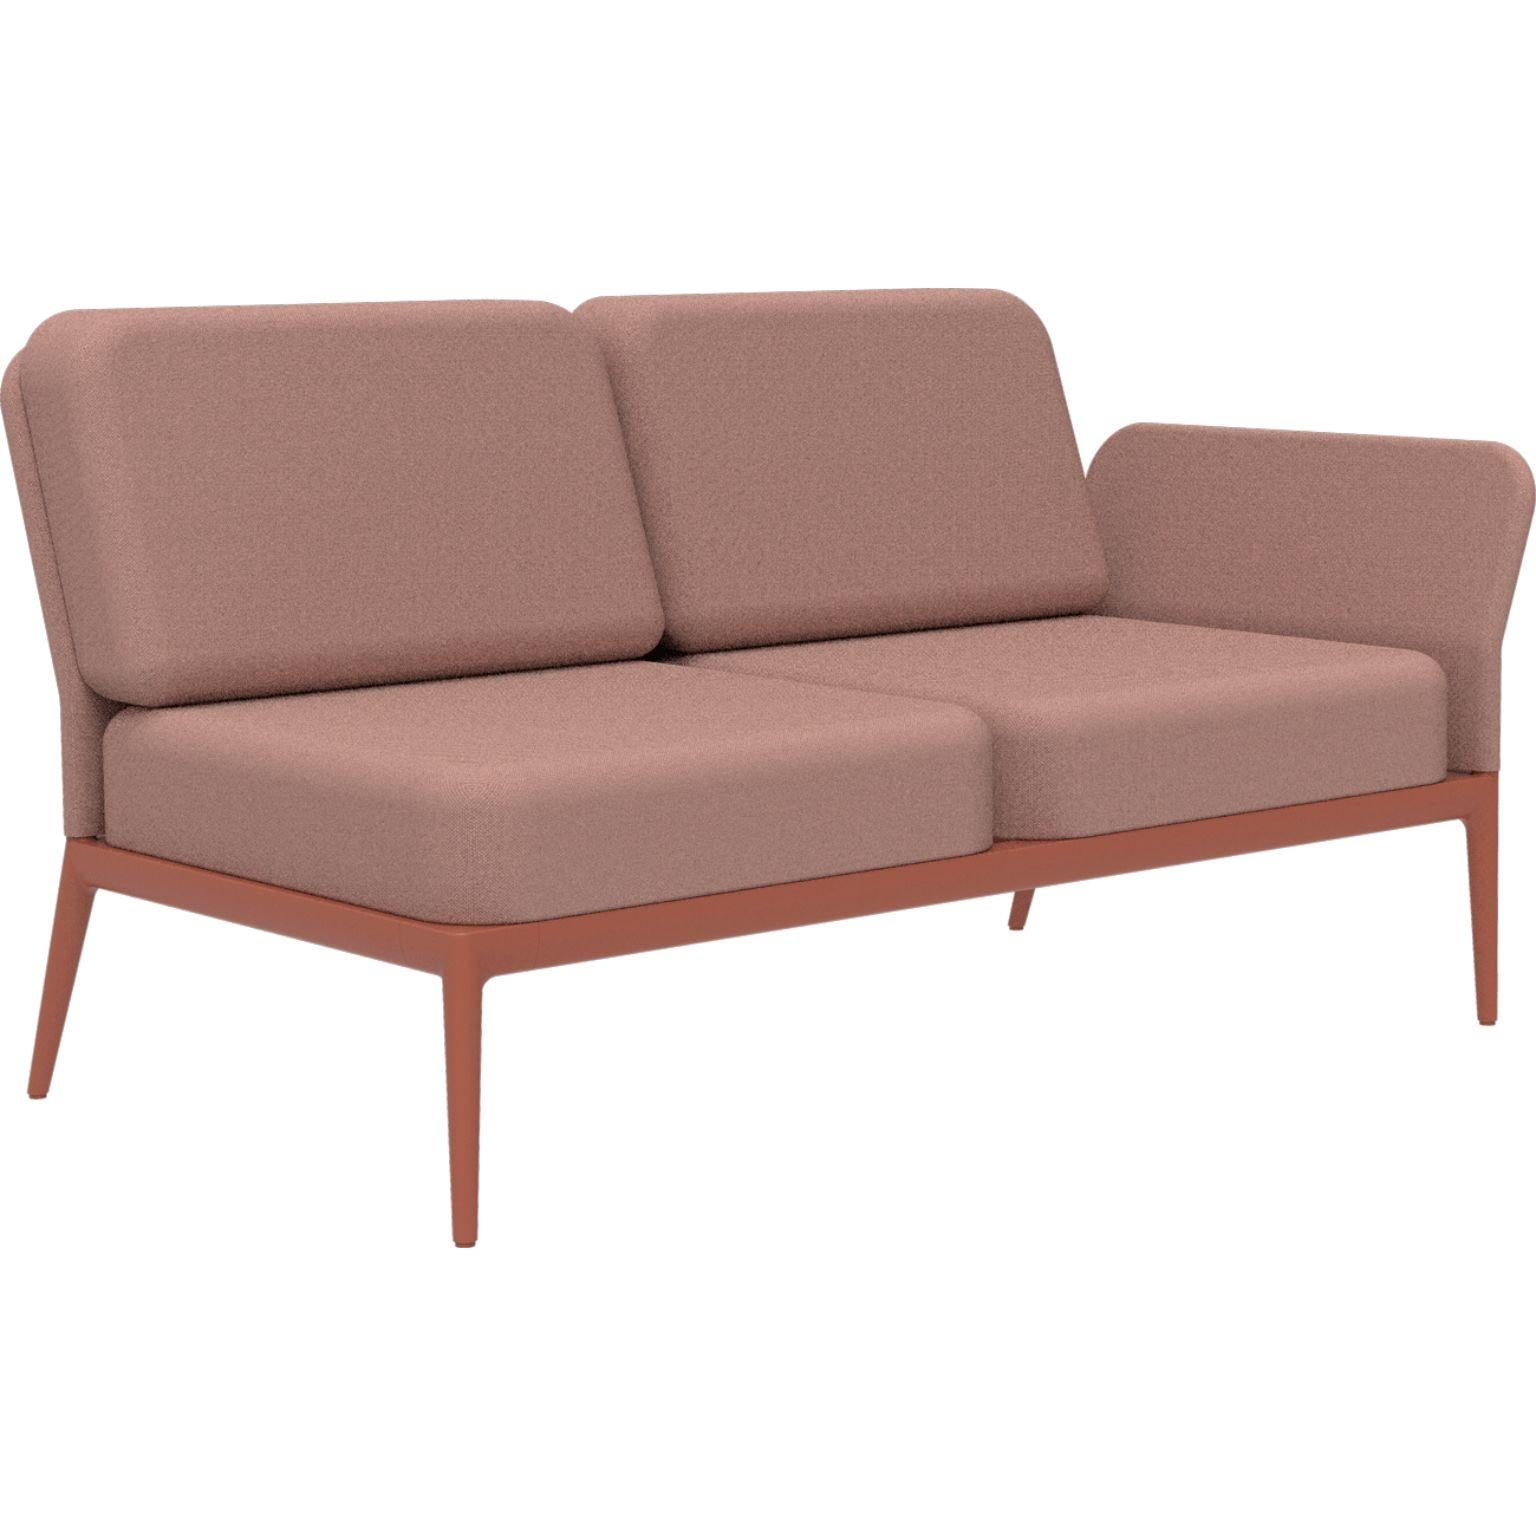 Cover Salmon Double Left Modular Sofa by MOWEE
Dimensions: D83 x W148 x H81 cm (seat height 42 cm)
Material: Aluminum and upholstery.
Weight: 29 kg.
Also available in different colors and finishes. Please contact us.

An unmistakable